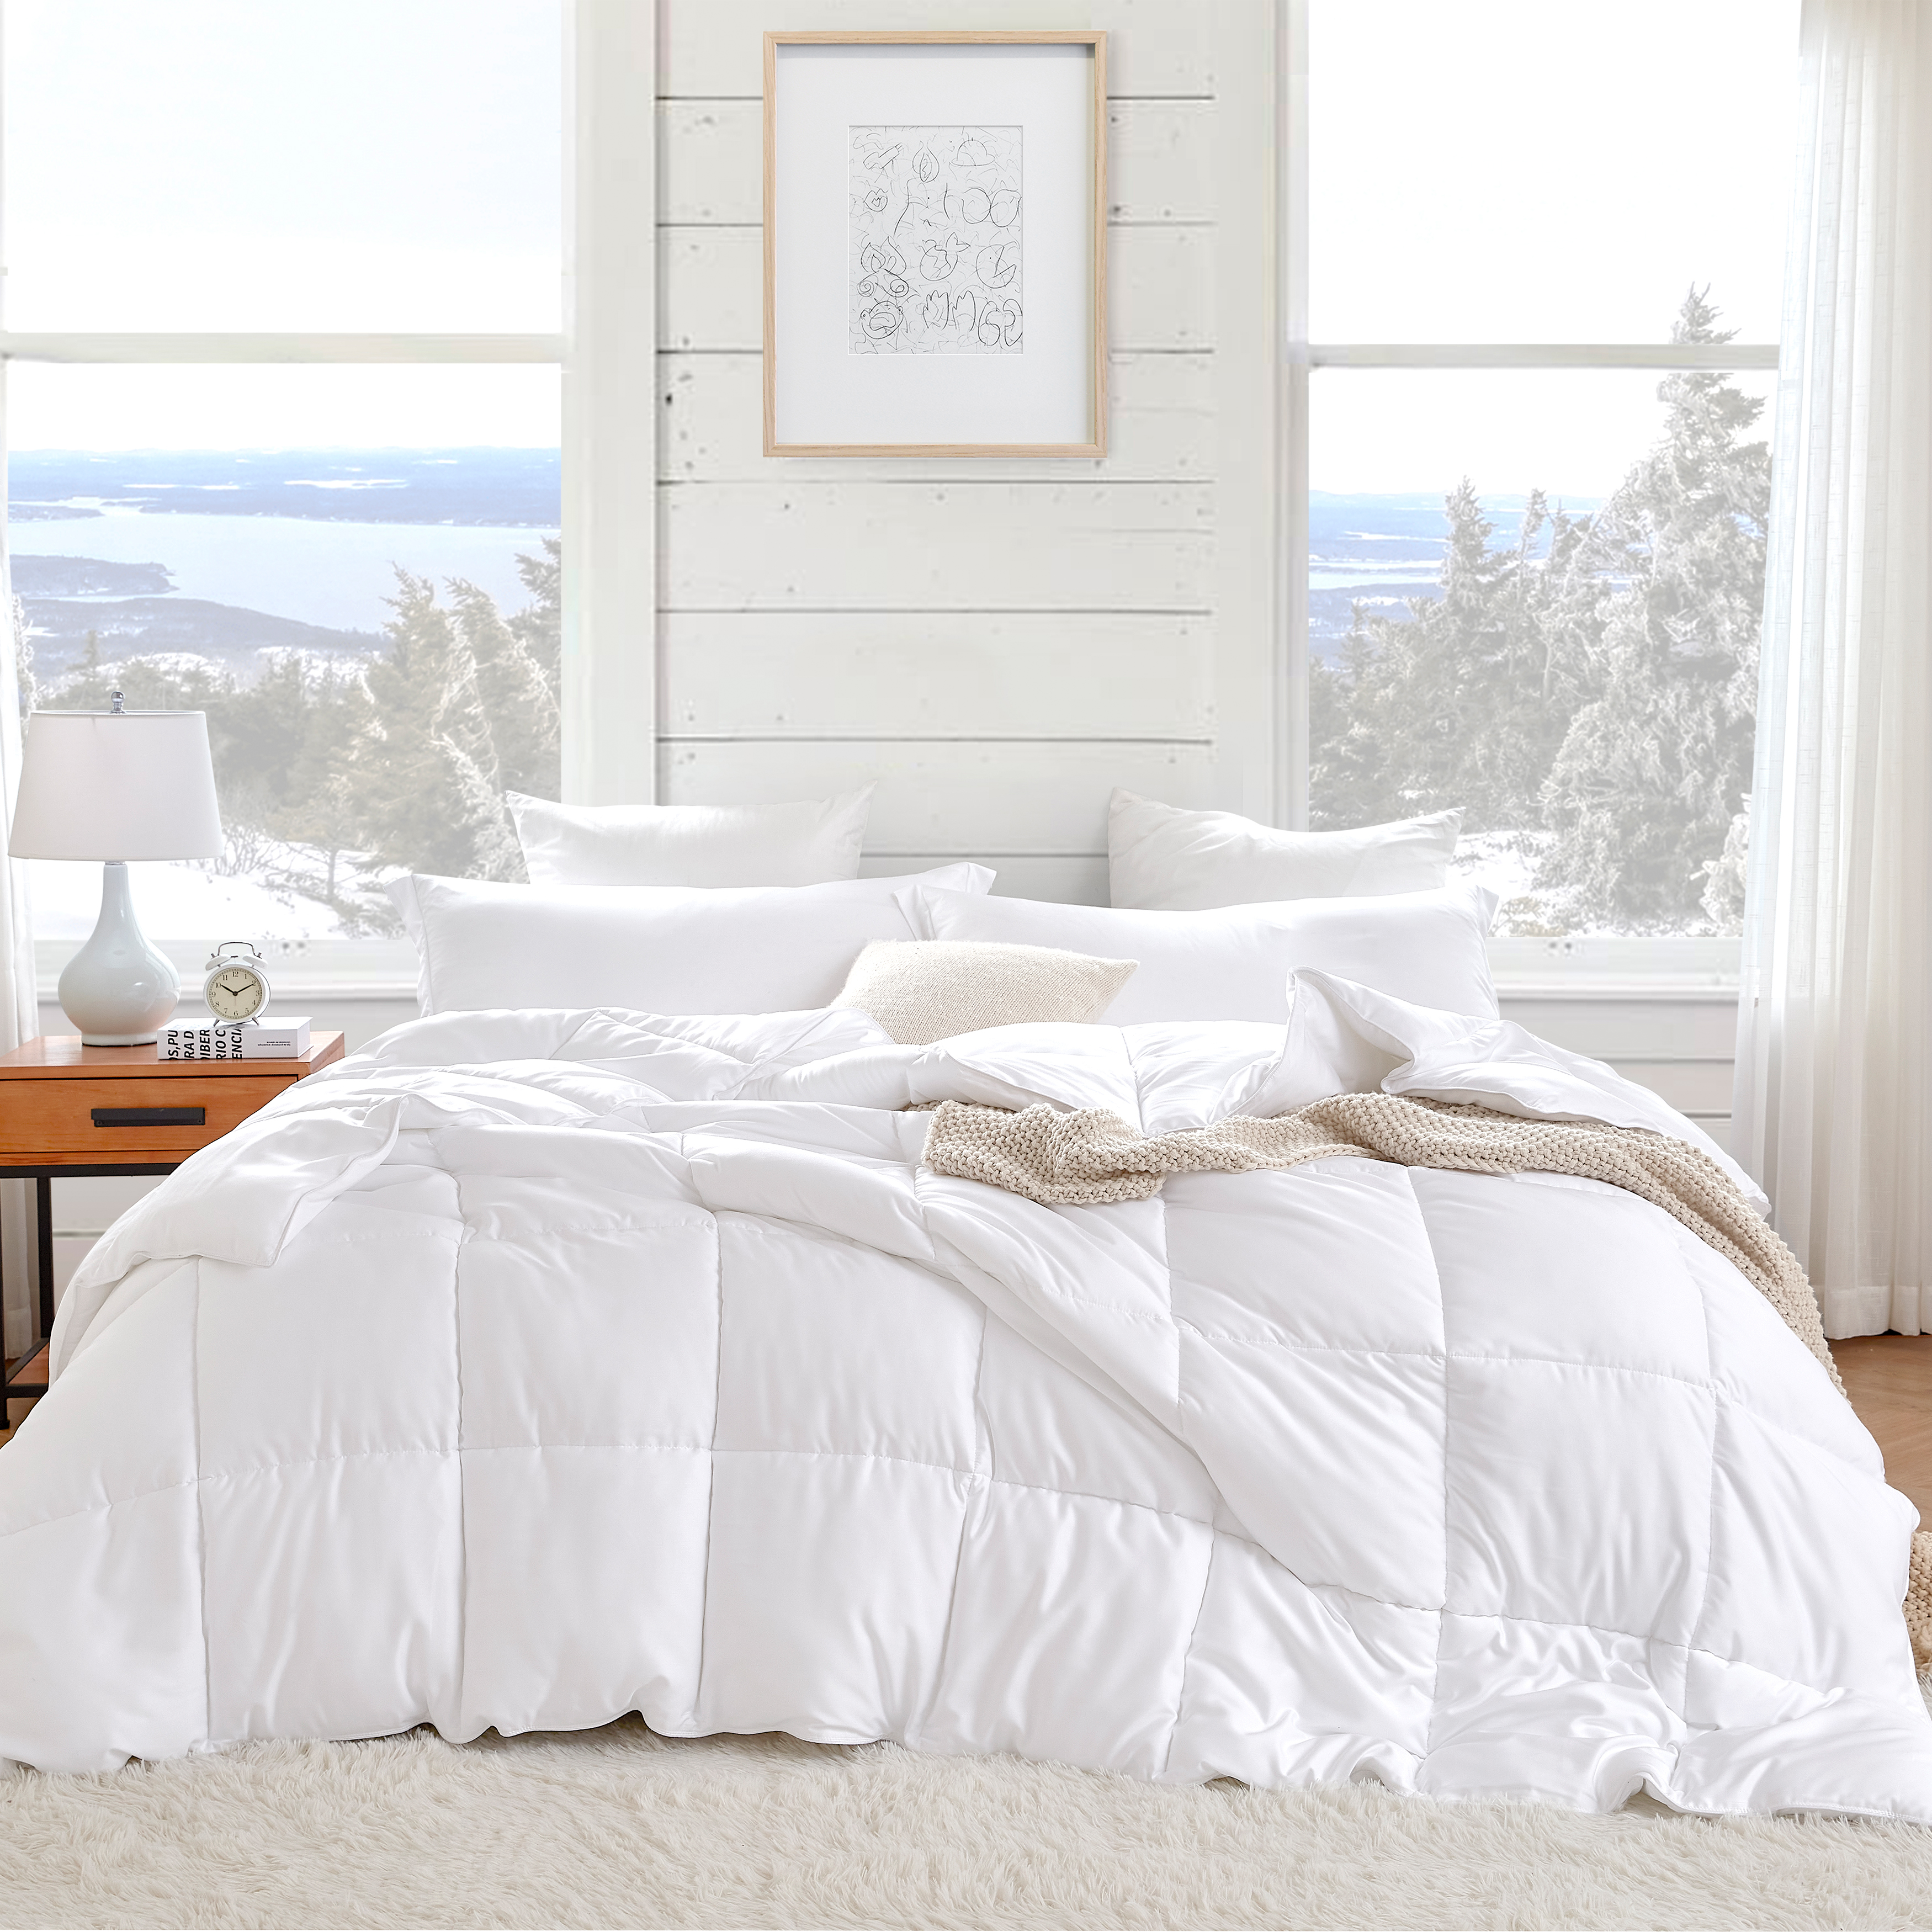 Snorze Cloud Comforter - Coma Inducer Ultra Cozy Bamboo - Oversized King in White